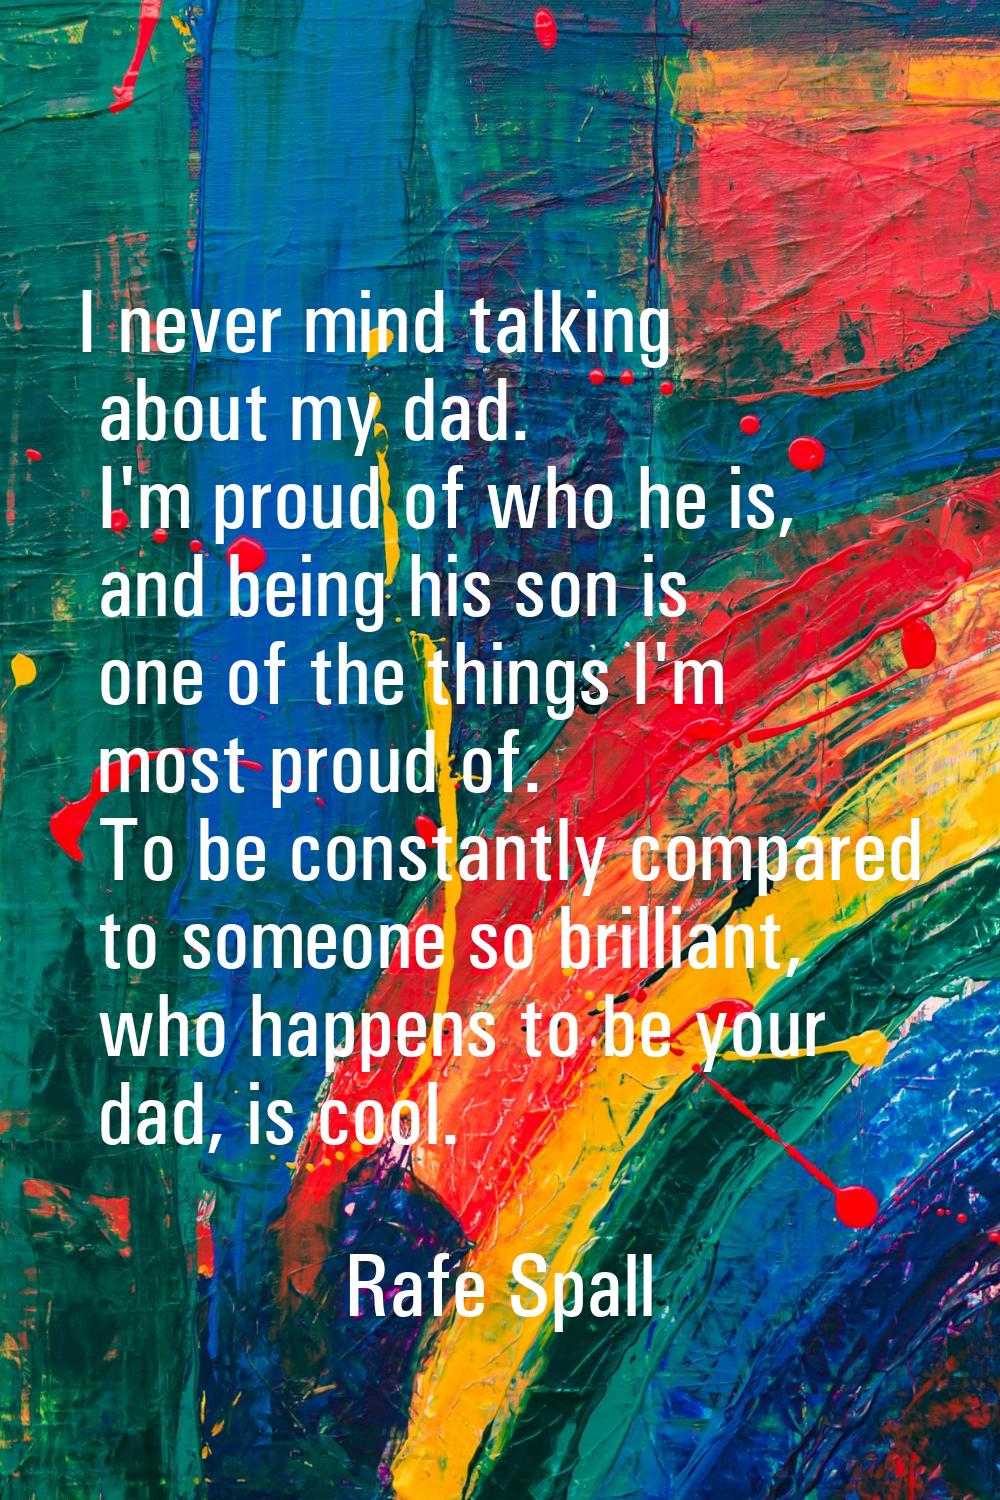 I never mind talking about my dad. I'm proud of who he is, and being his son is one of the things I